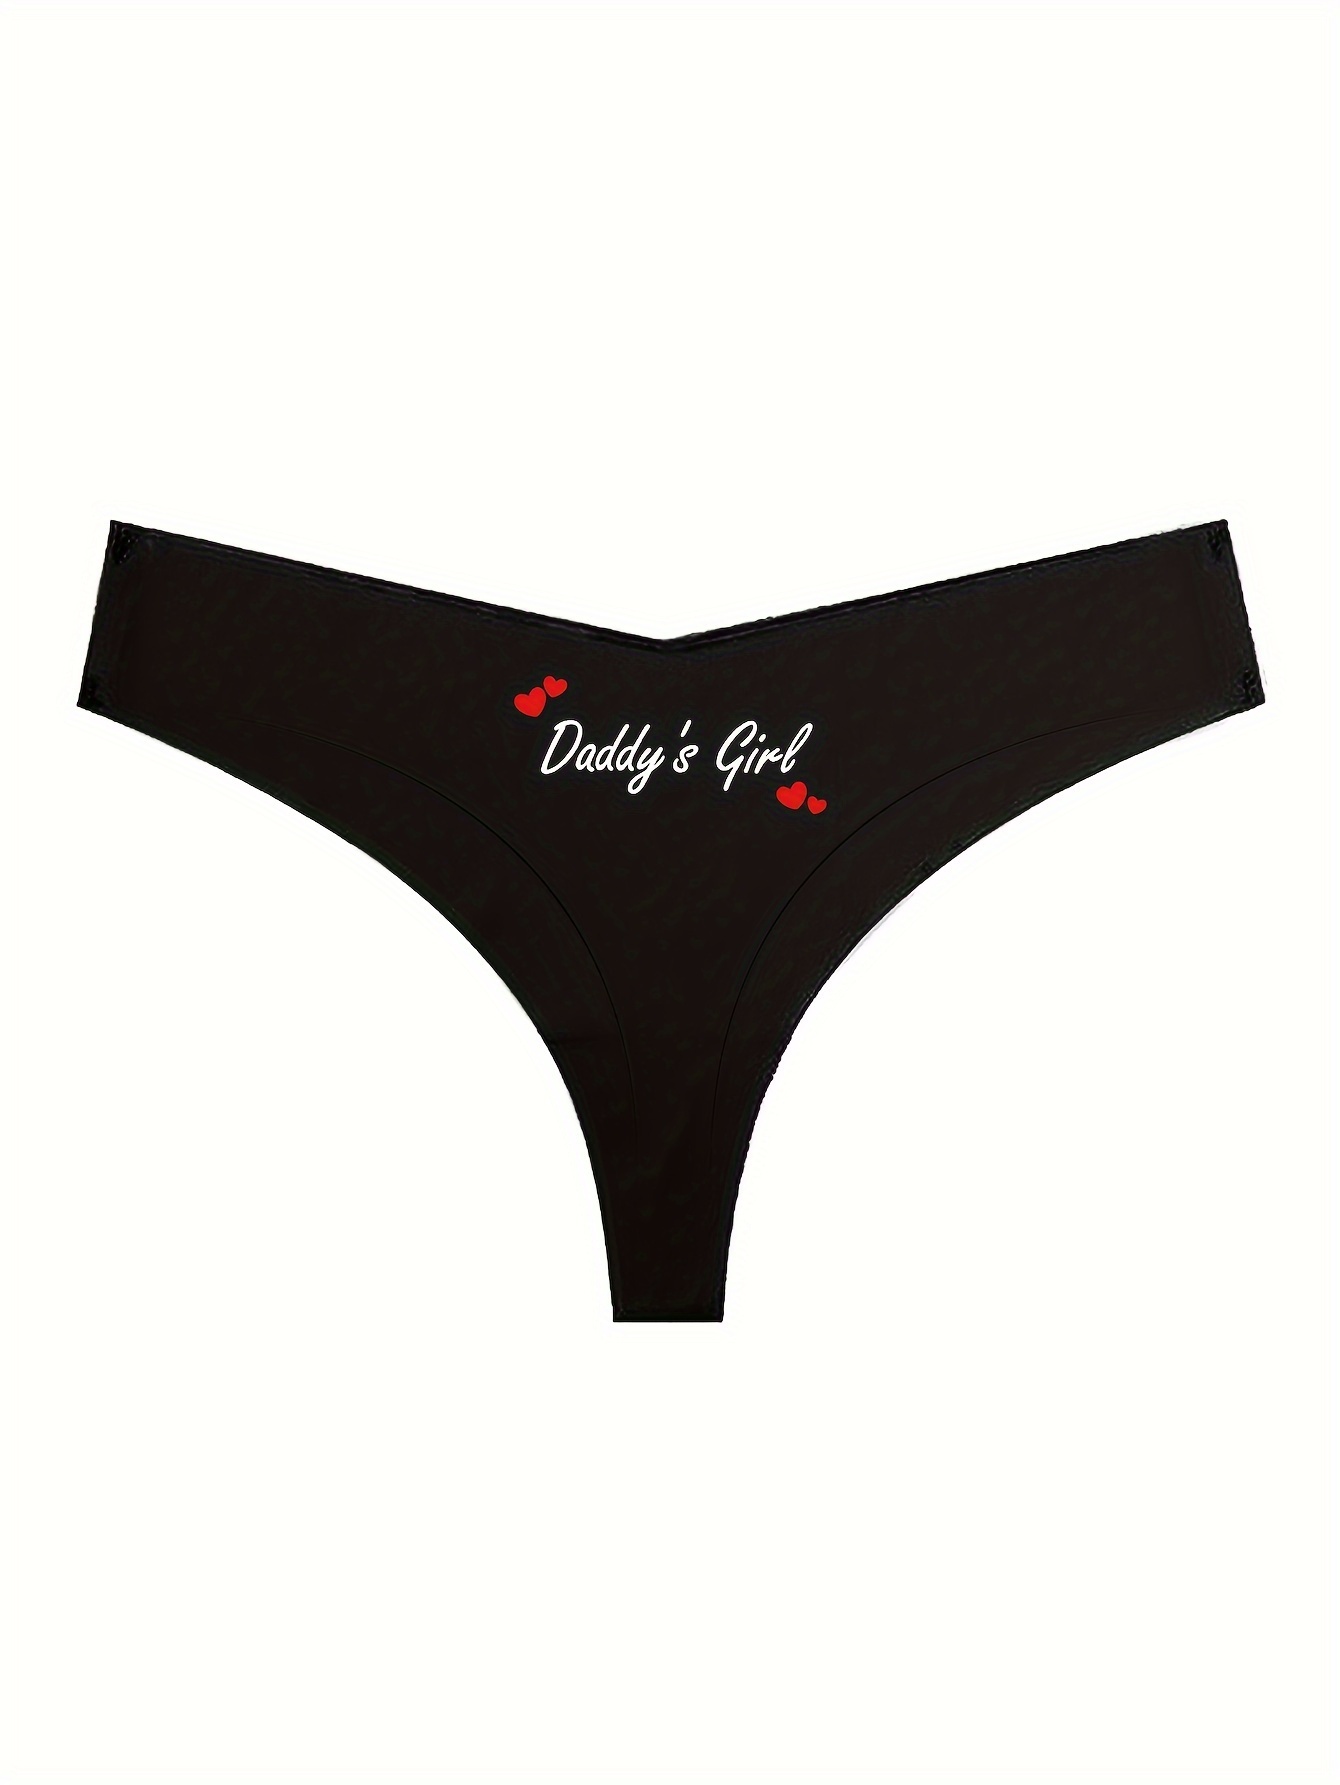 Sexy Thong Women Underwear Lingerie Knickers G String Daddy's Girl Print